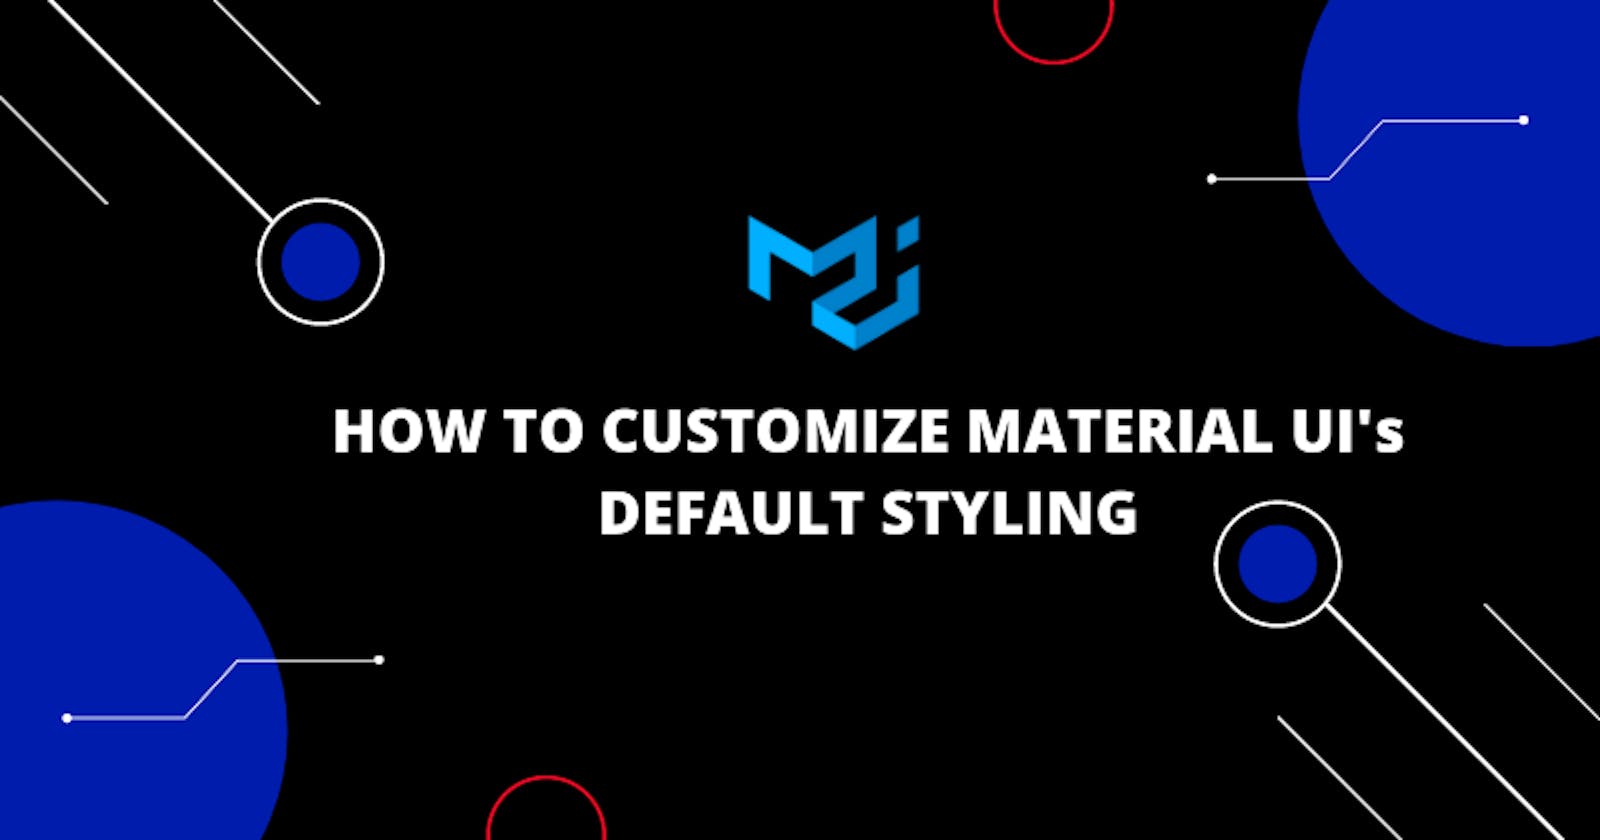 HOW TO CUSTOMIZE MATERIAL UI's DEFAULT STYLING